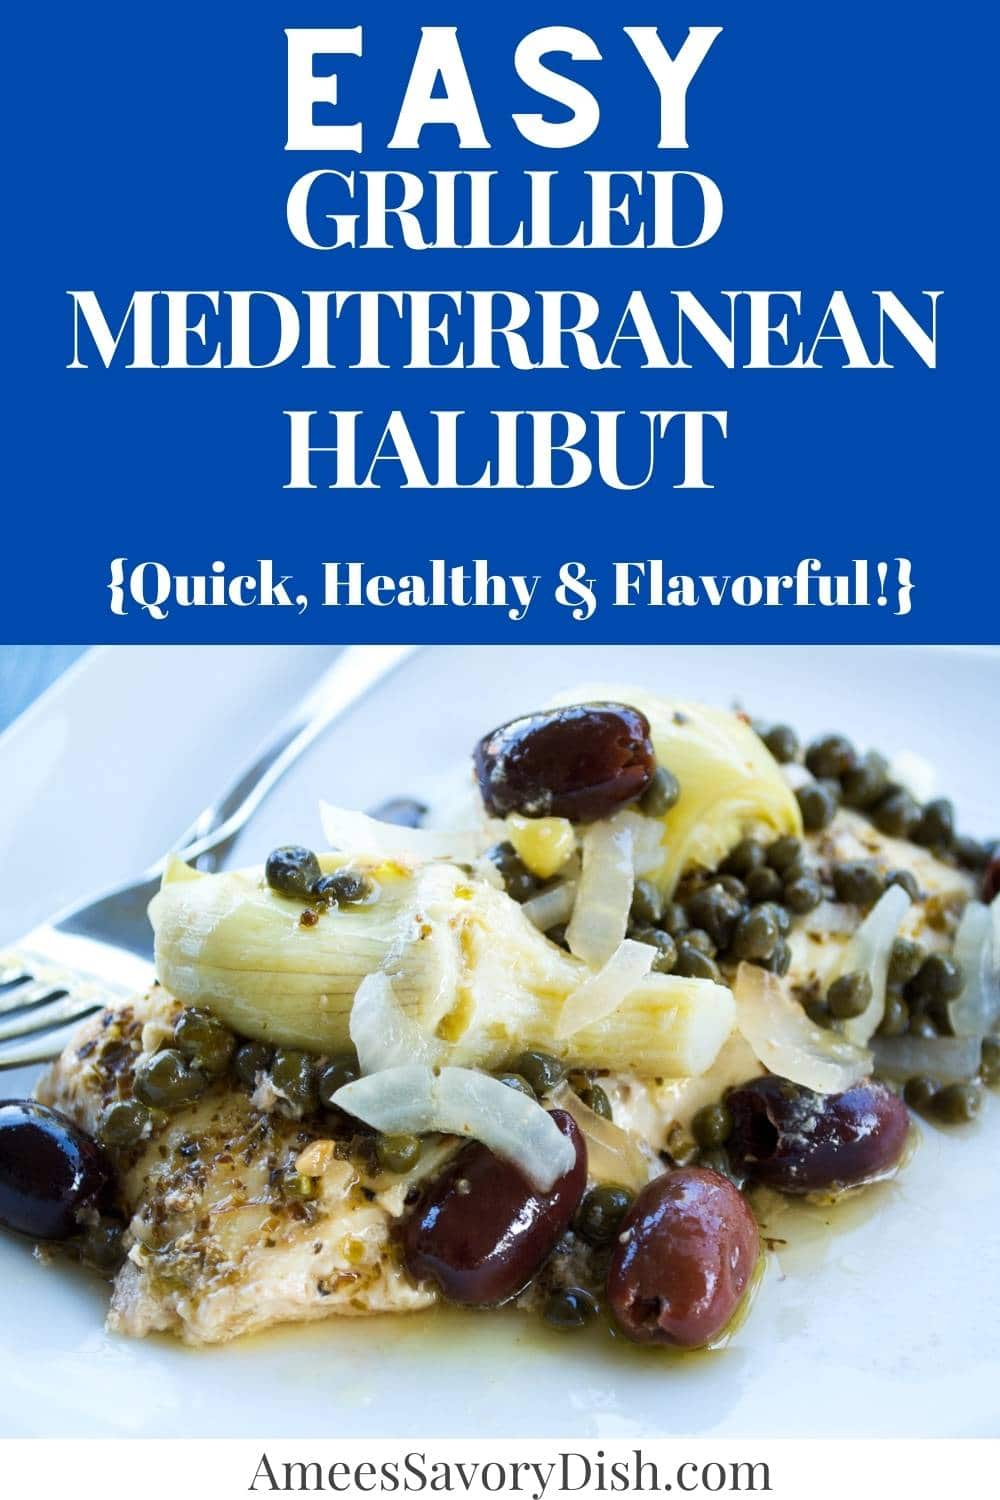 These Mediterranean Halibut foil packets showcase beautiful halibut fillets with simple Greek seasonings, a medley of marinated antipasto vegetables, and extra virgin olive oil. via @Ameessavorydish